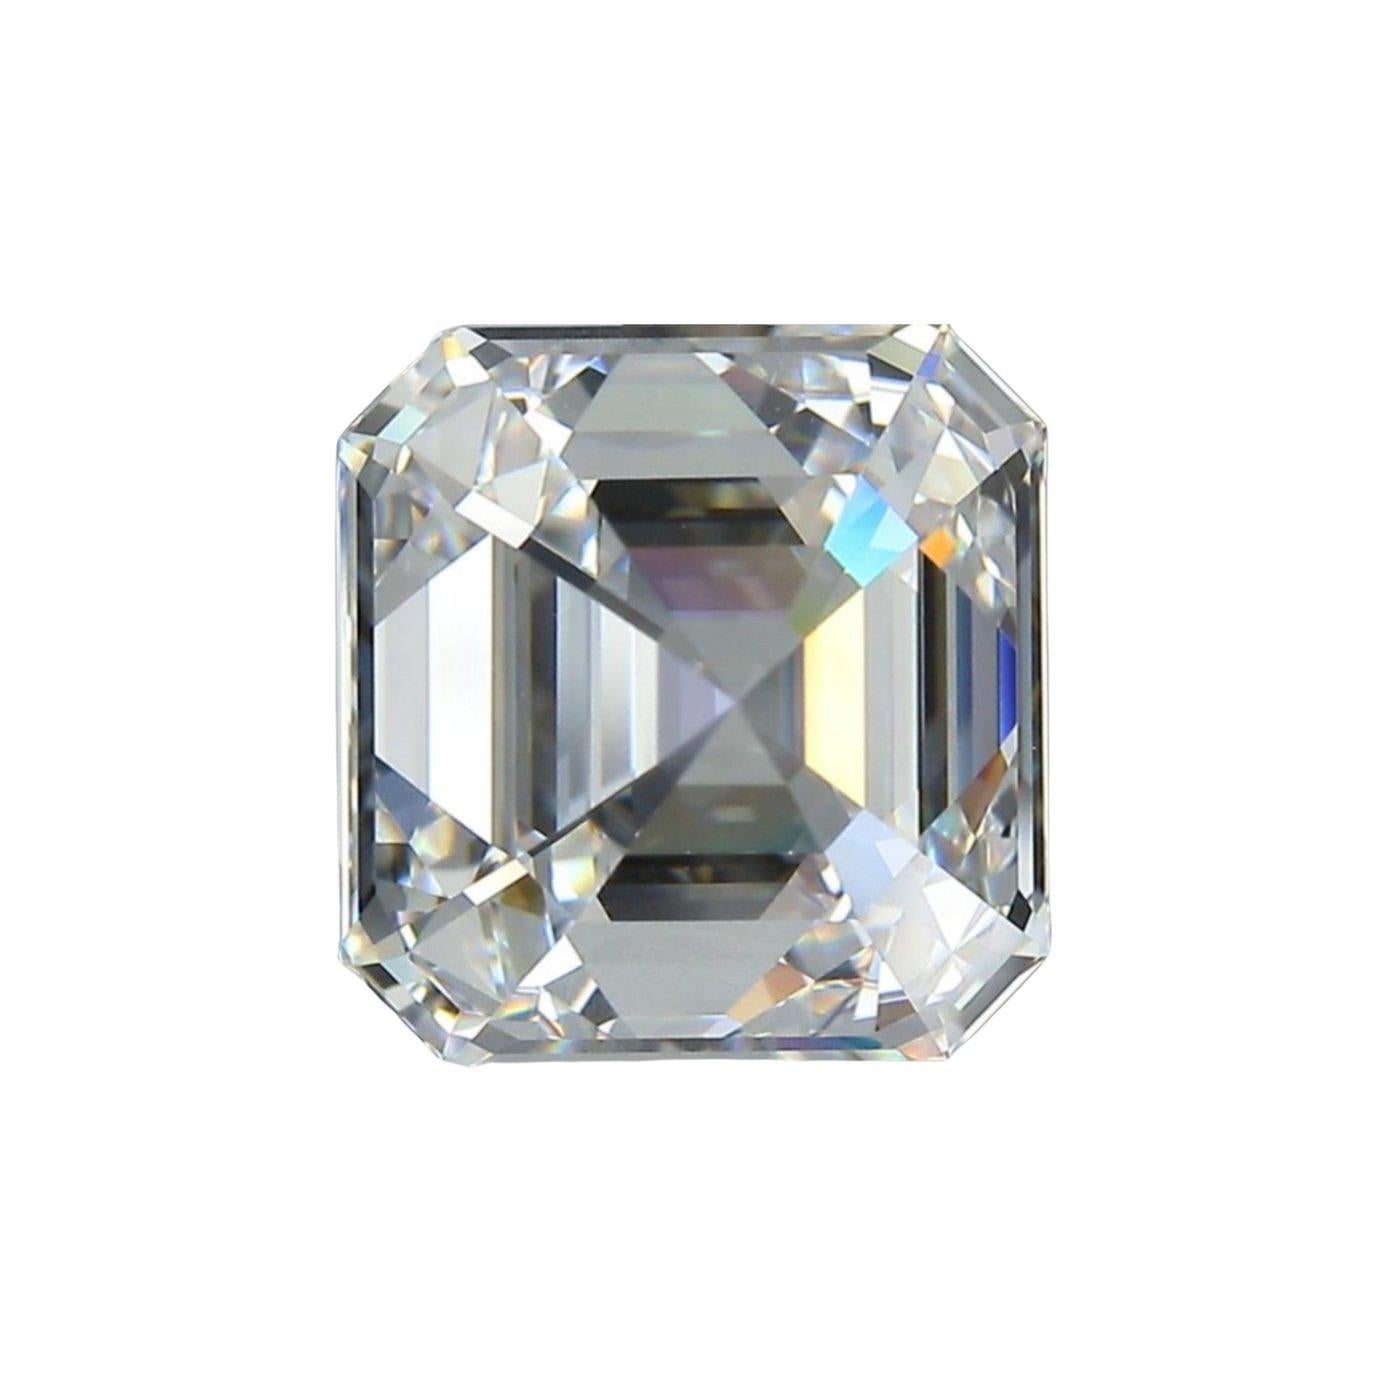 A Sparkling and shiny square emerald cut natural diamond in a 0.7 carat E VS2 with excellent polish and very good symmetry. This diamond comes with an IGI Certificate, laser inscription number, and security seal.

SKU: RK-02287
IGI 567359787